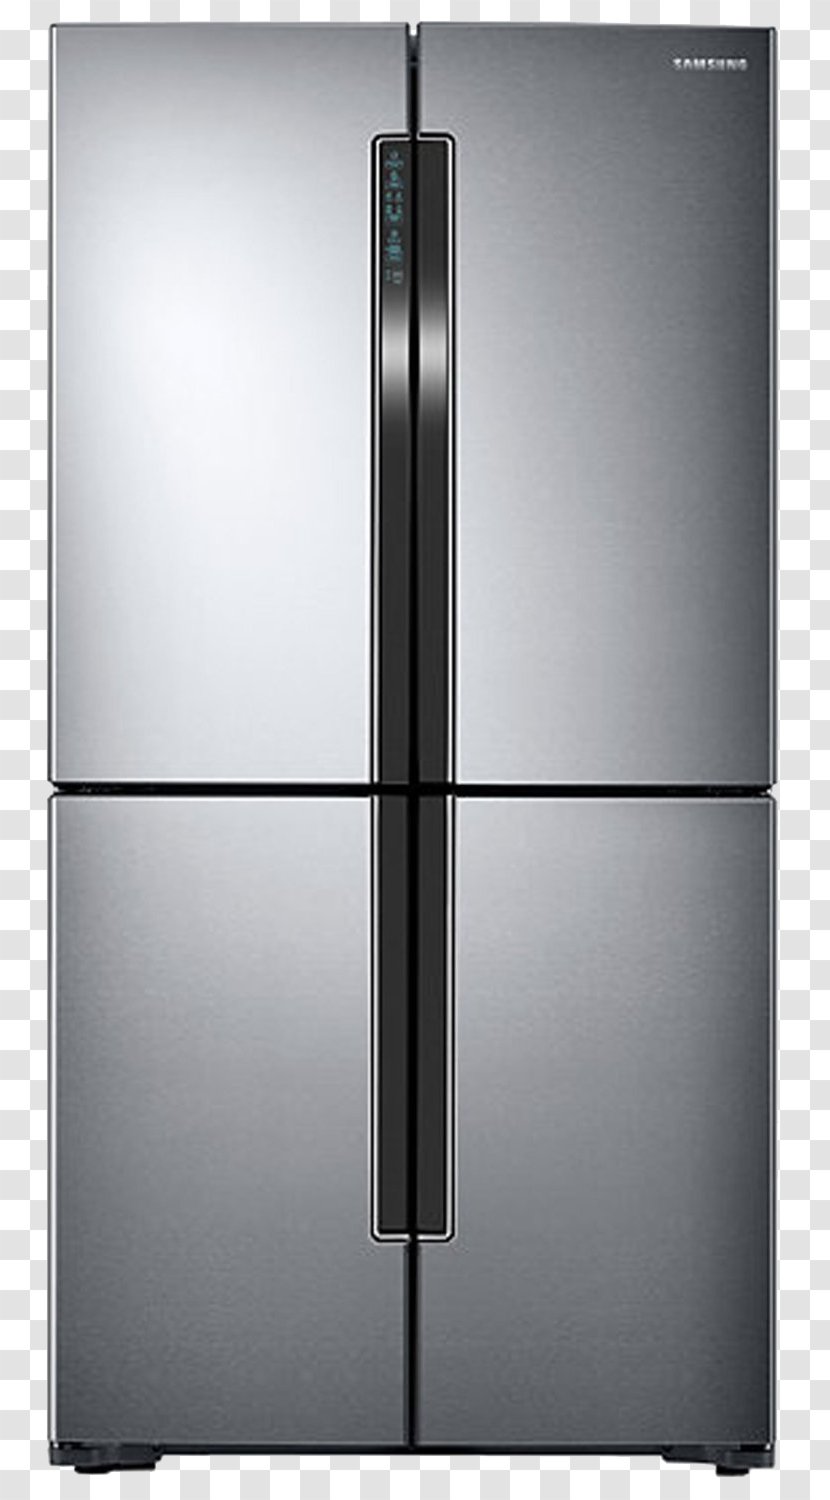 Kanpur Refrigerator Auto-defrost Samsung Electronics - Direct Cool - Quiet Large Capacity Energy-saving Refrigerators Transparent PNG